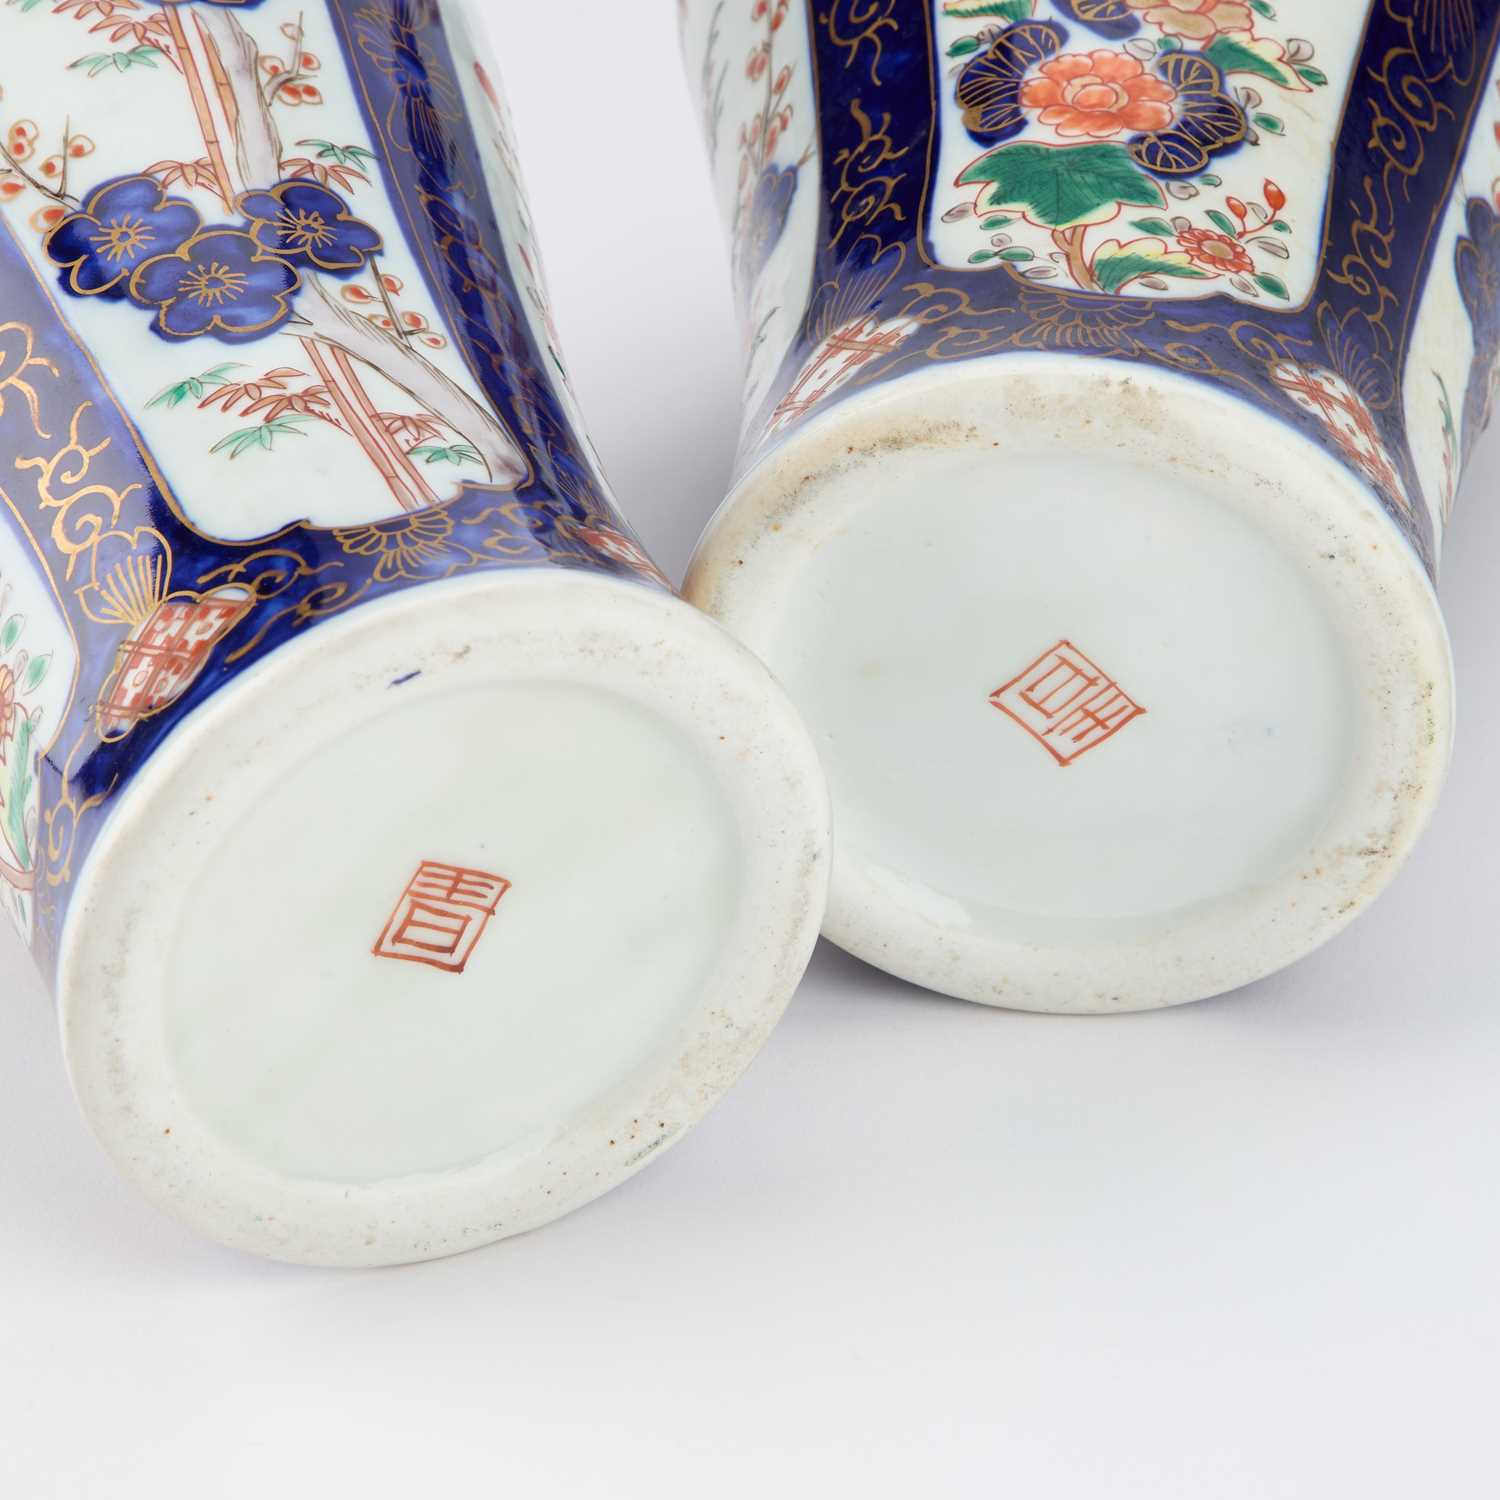 A PAIR OF CONTINENTAL PORCELAIN VASES AND COVERS, CIRCA 1900 - Image 2 of 2